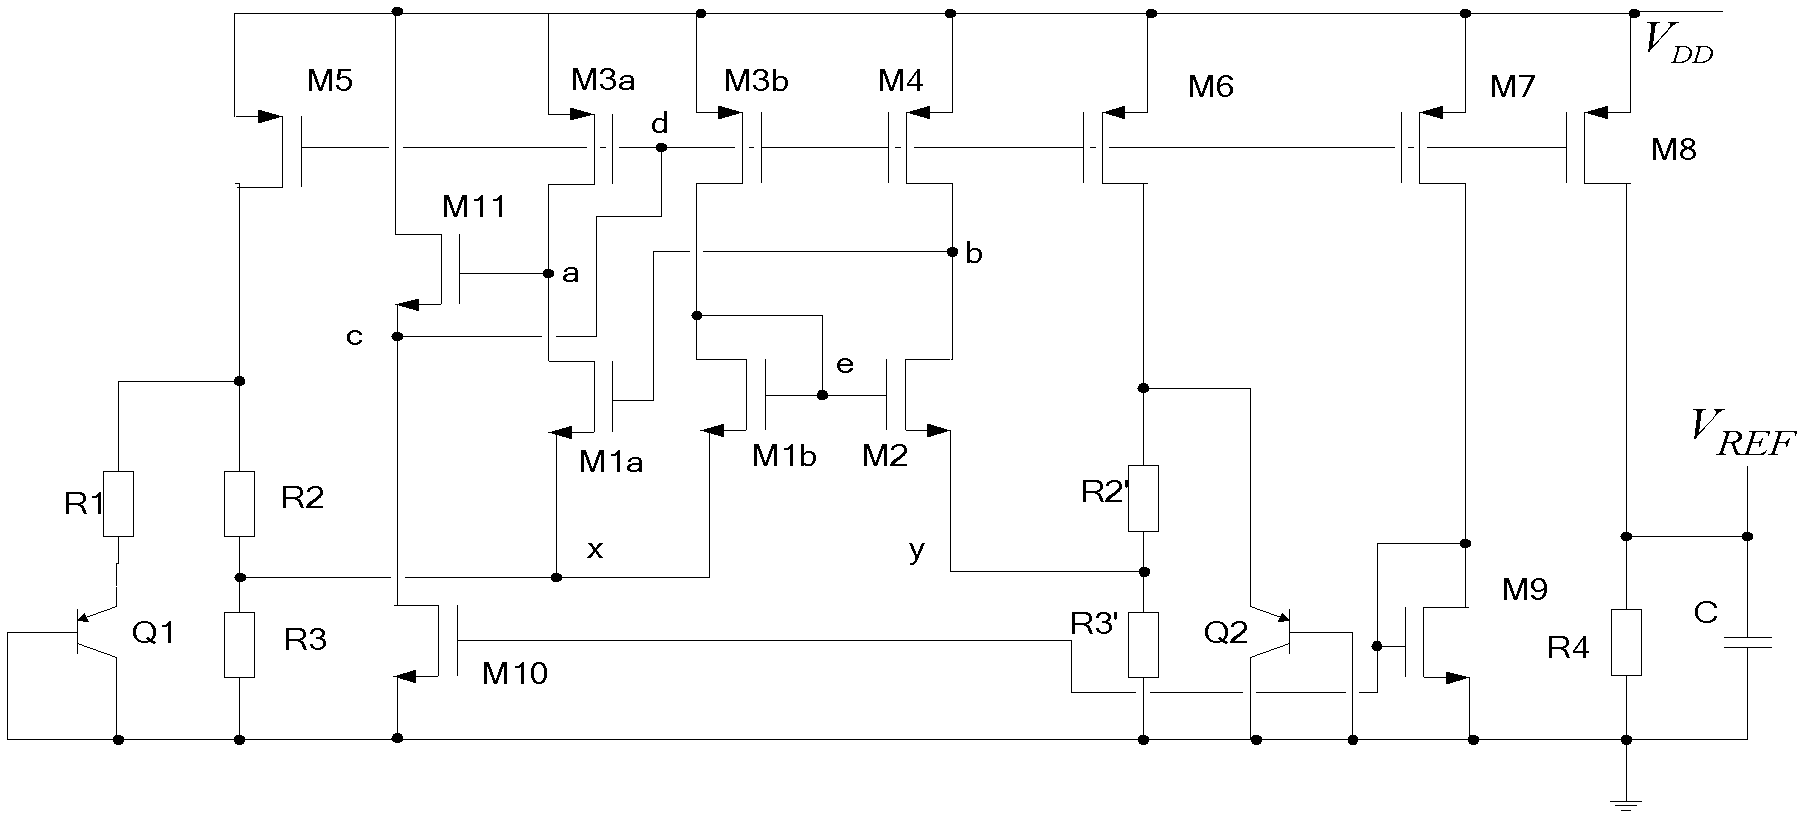 Band gap reference voltage source circuit